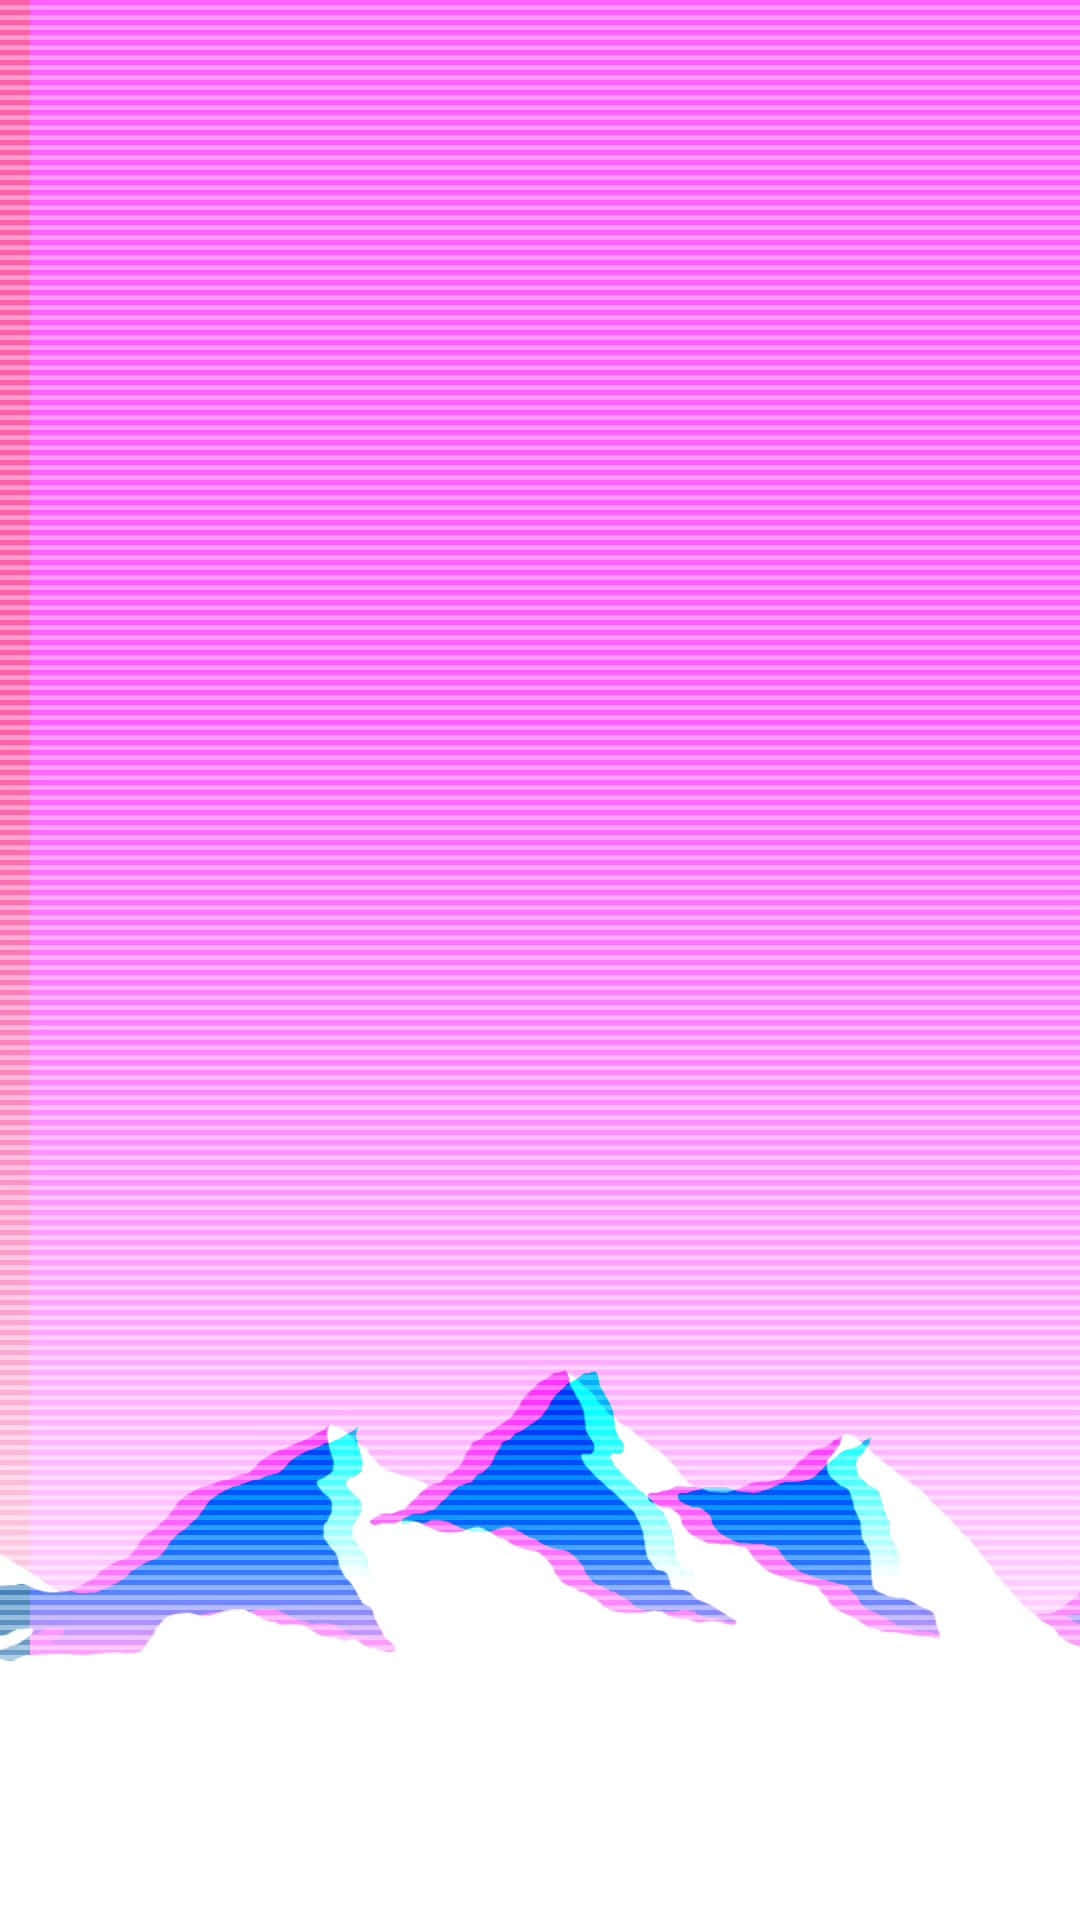 “Welcome to the Aesthetic Vaporwave.” Wallpaper